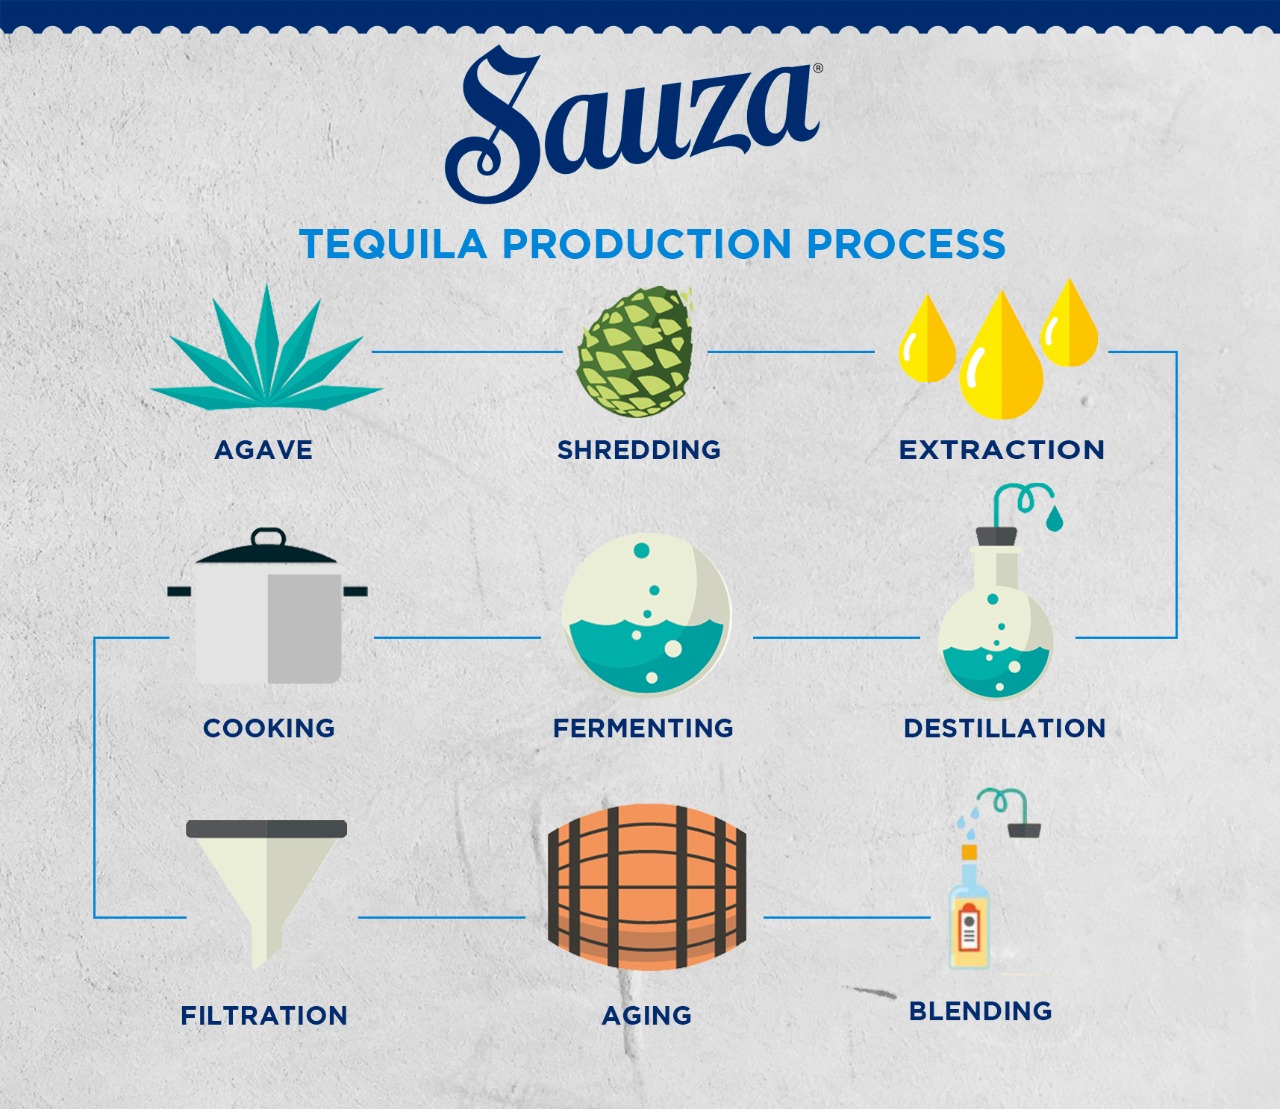 Tequila production process at Sauza